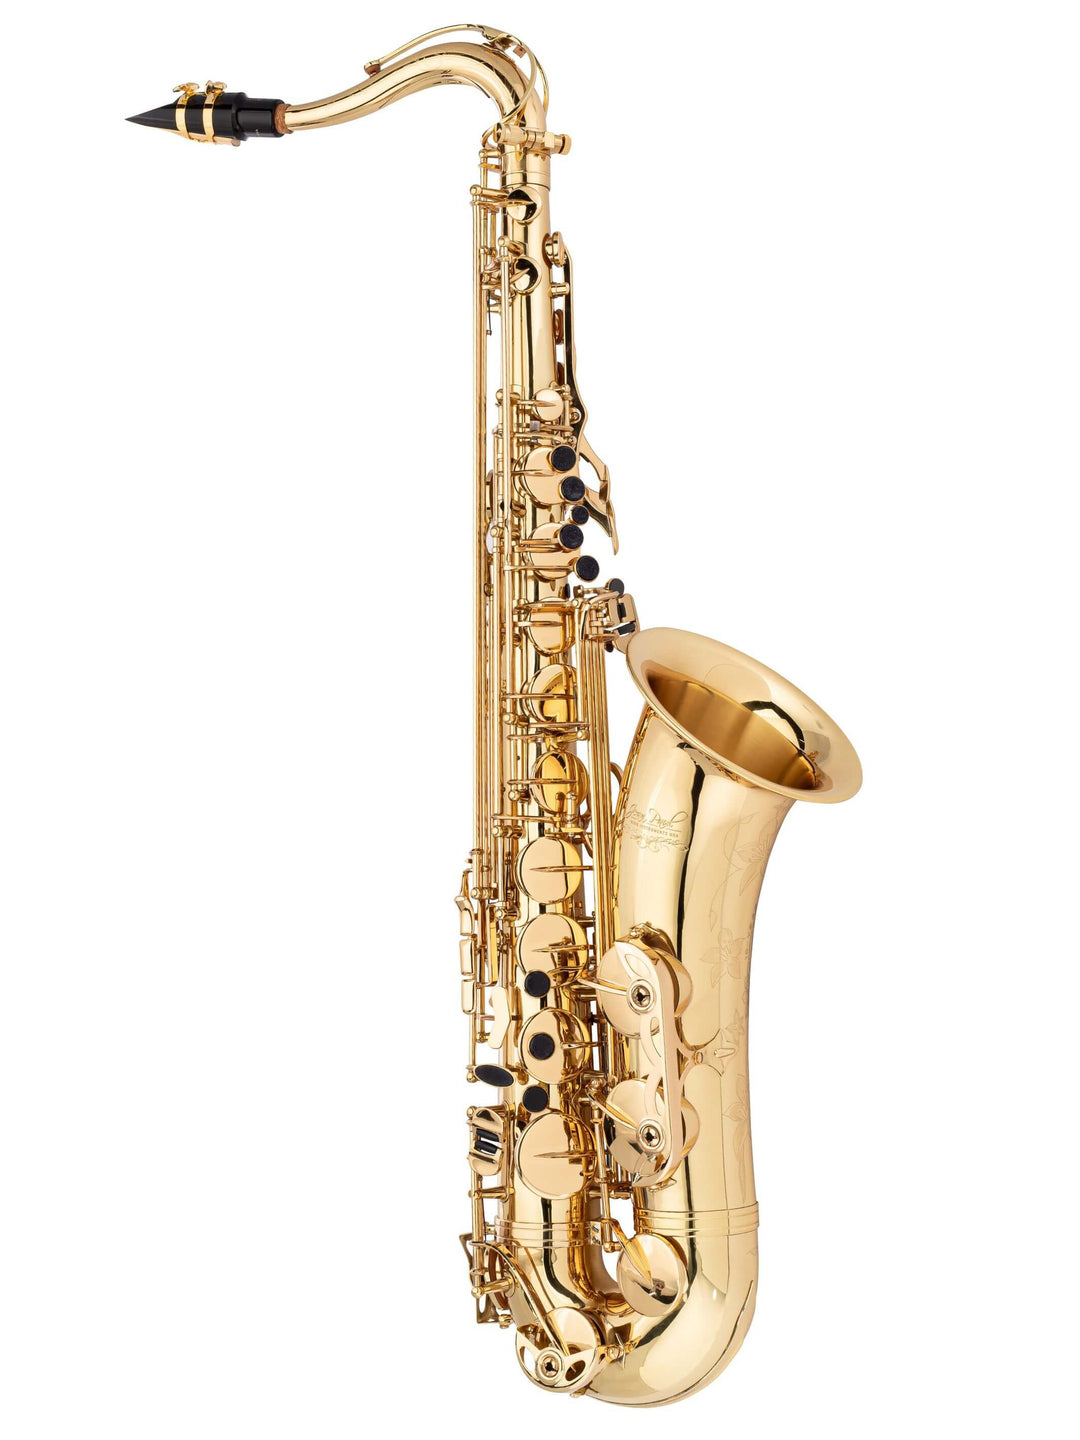 TS-860U Tenor Saxophone Unlacquered Side View 1#finish_unlacquered